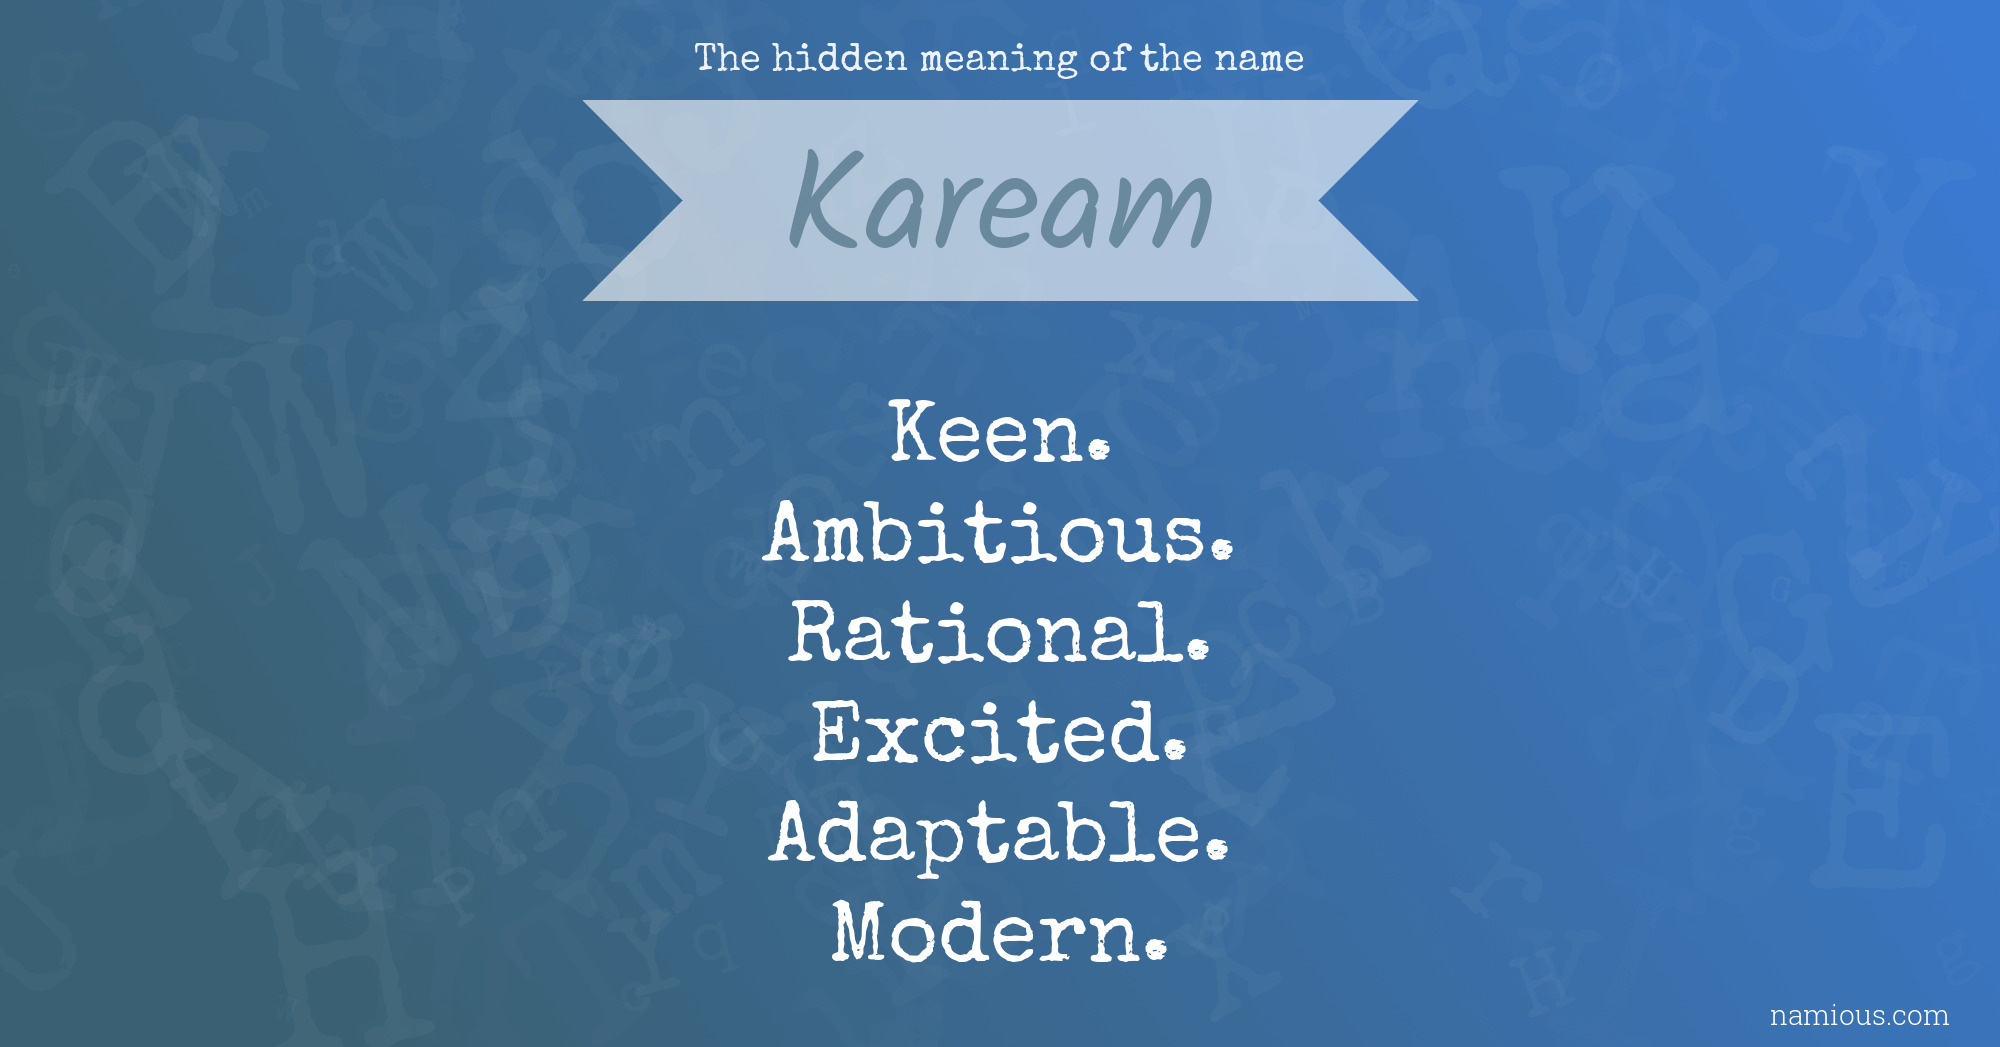 The hidden meaning of the name Kaream